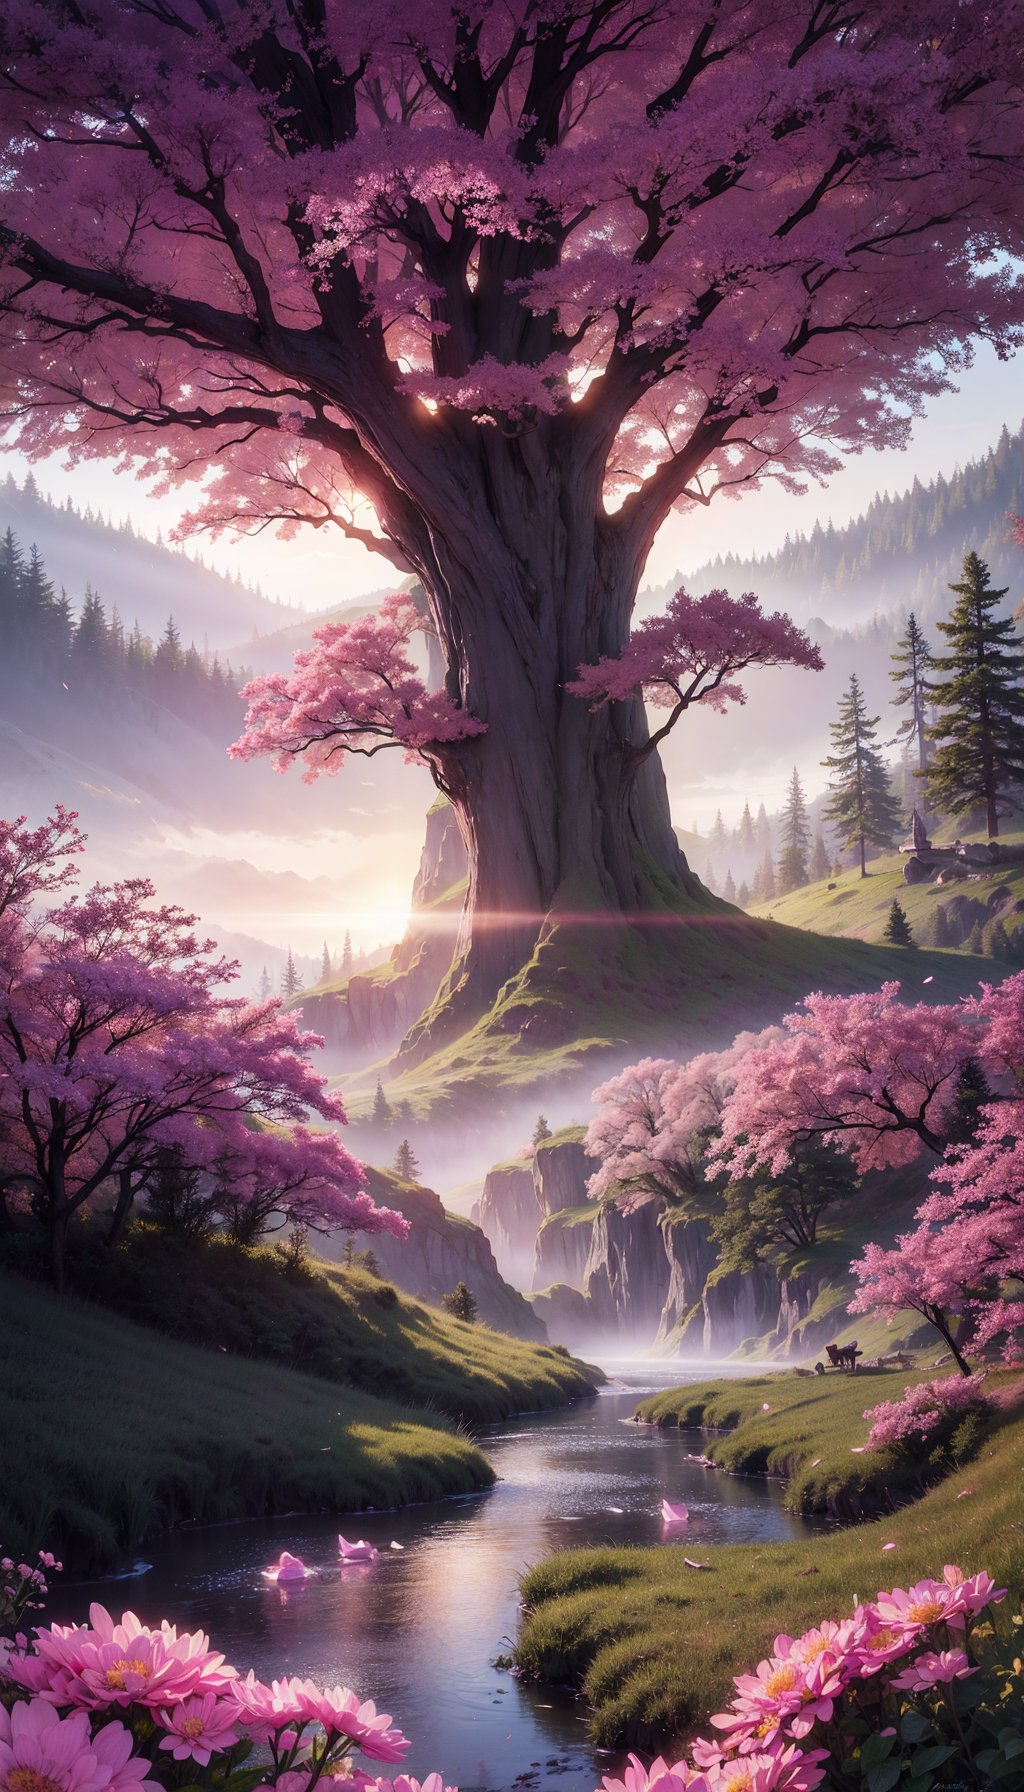 digital painting,
fantasy, hidden forest, centered big tree, glowing crystals, flowers, flowers petal, fog, at dawn